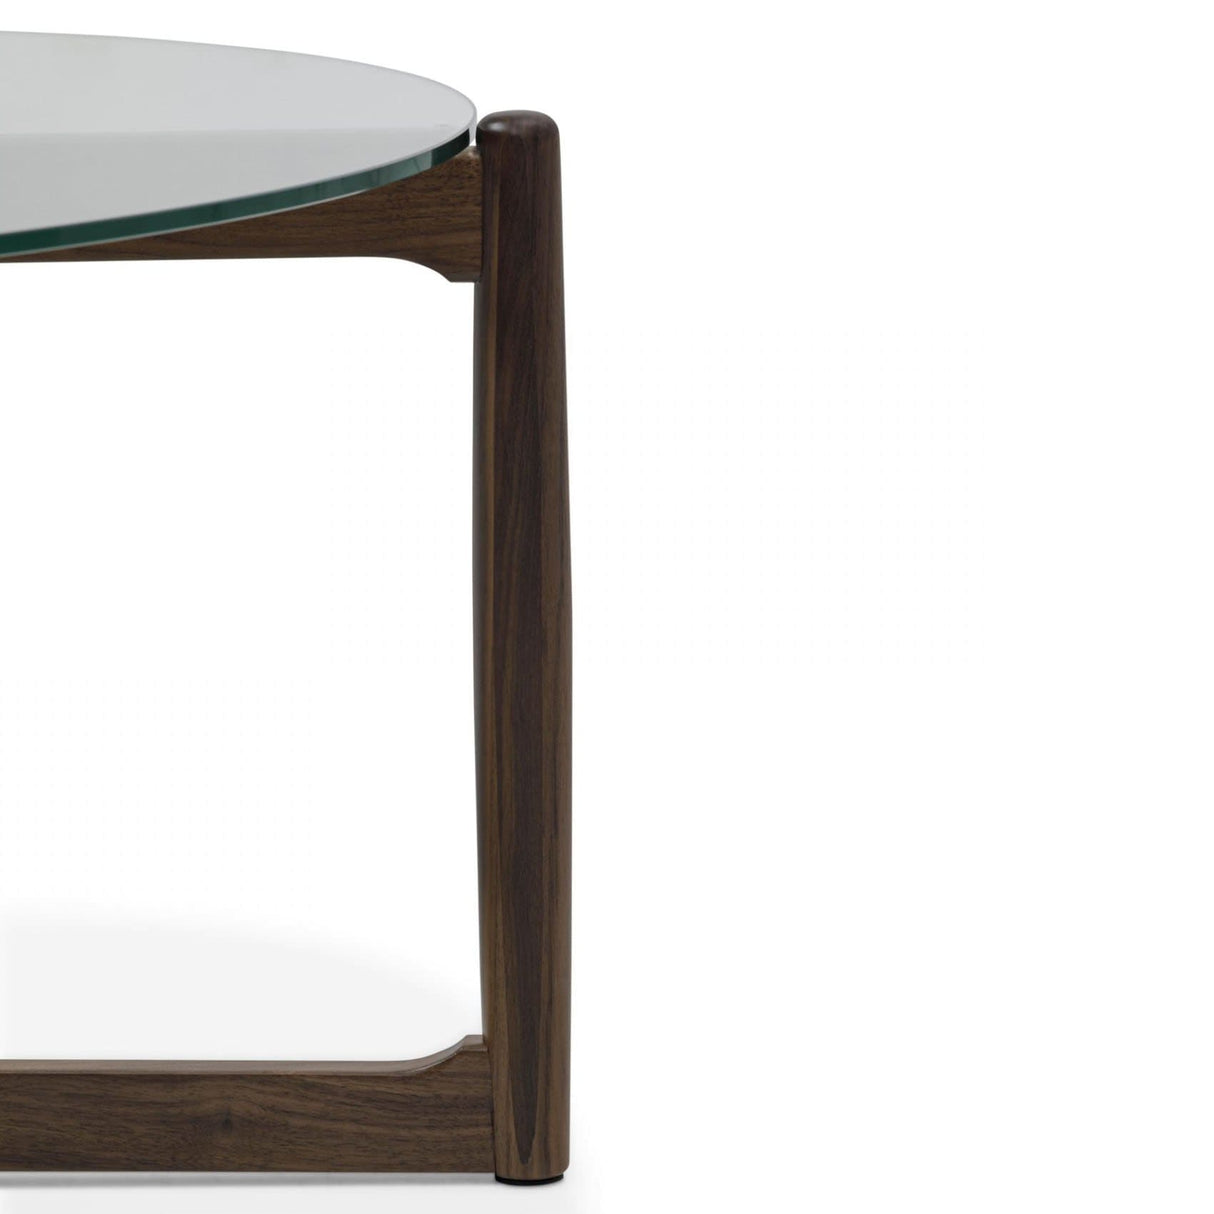 BLU Home Hetta Coffee Table - HOLD FOR PRICING Furniture